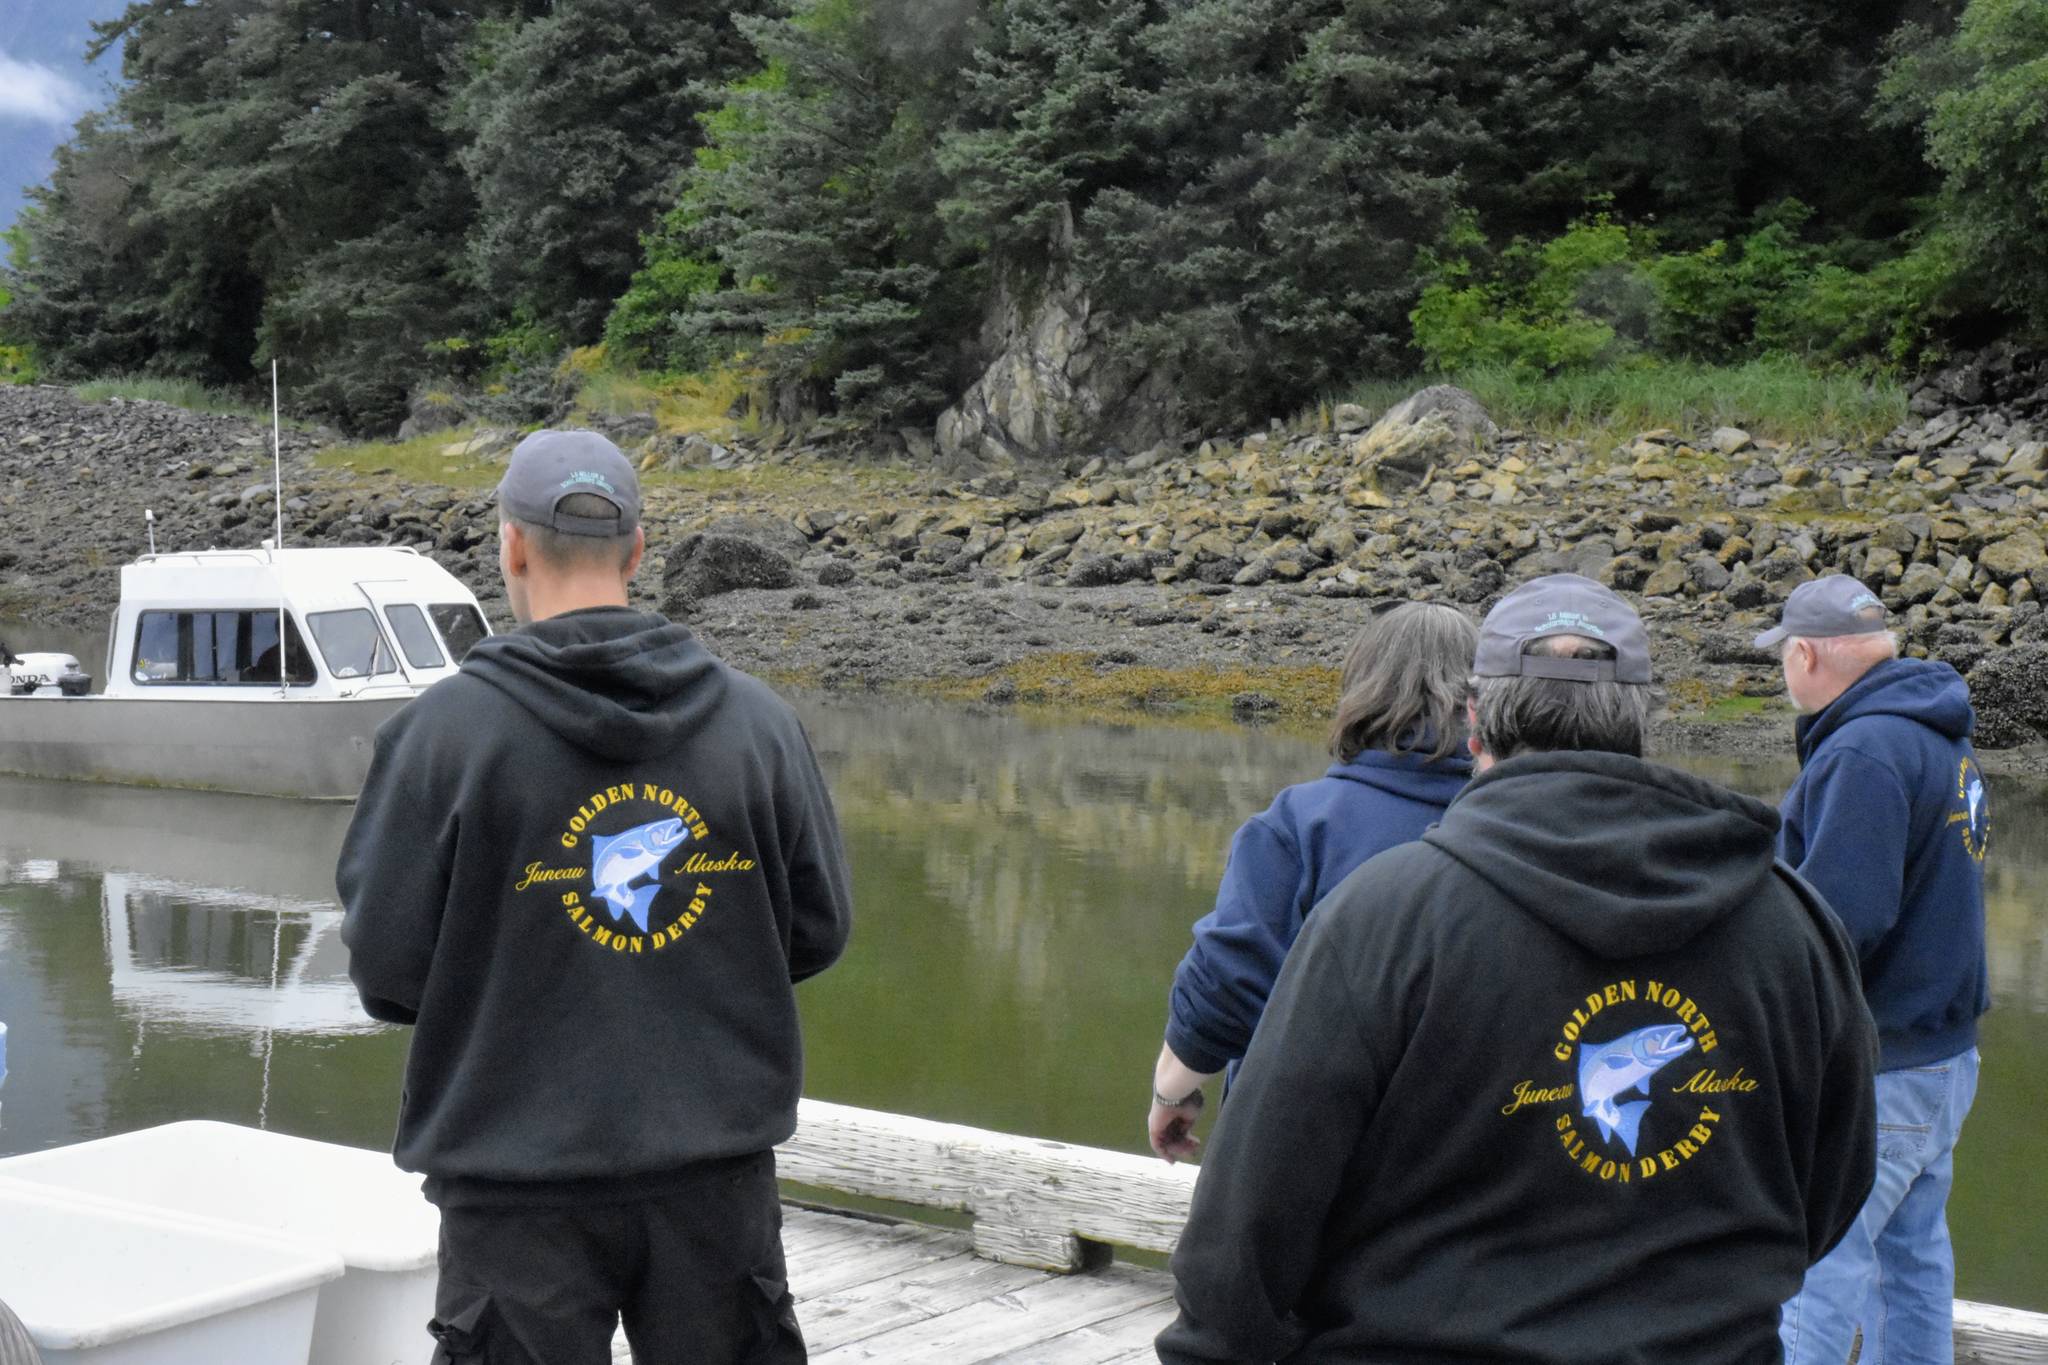 Dock volunteers prepare to greet a boat at the Mike Pusich Douglas Harbor weigh station for the 75th annual Golden North Salmon Derby on Saturday, Aug. 14, 2021. This boat turned out not to be involved in the derby, but the volunteers were ready nonetheless. (Peter Segall / Juneau Empire)